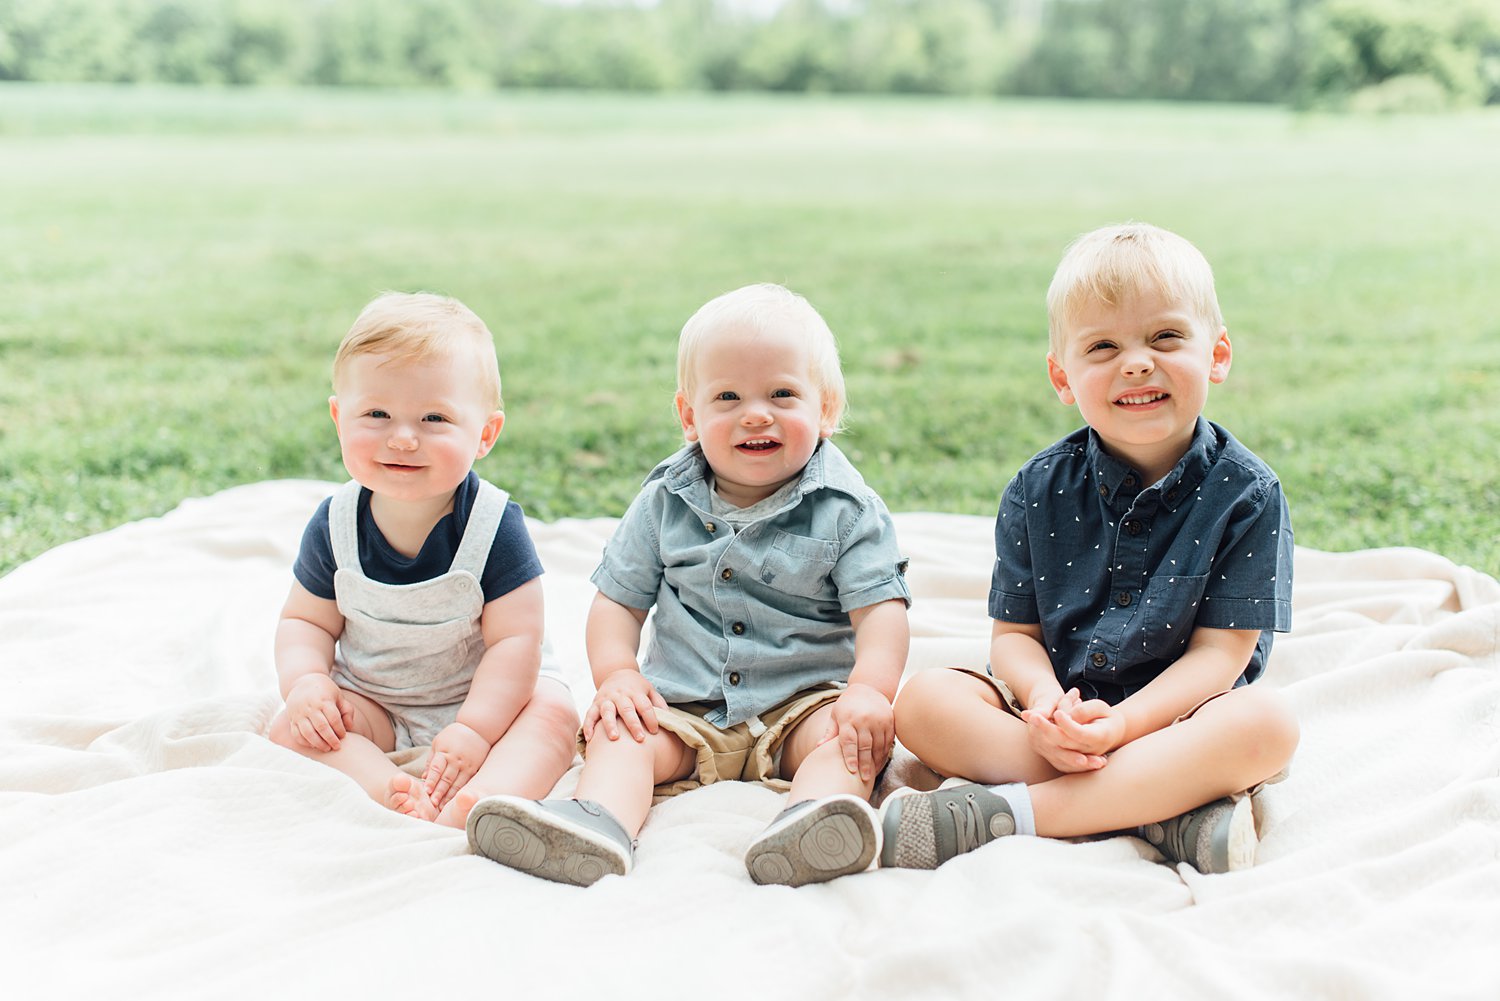 Lutz Family - Tyler State Park Family Session - Maryland Family Photographer - Alison Dunn Photography photo